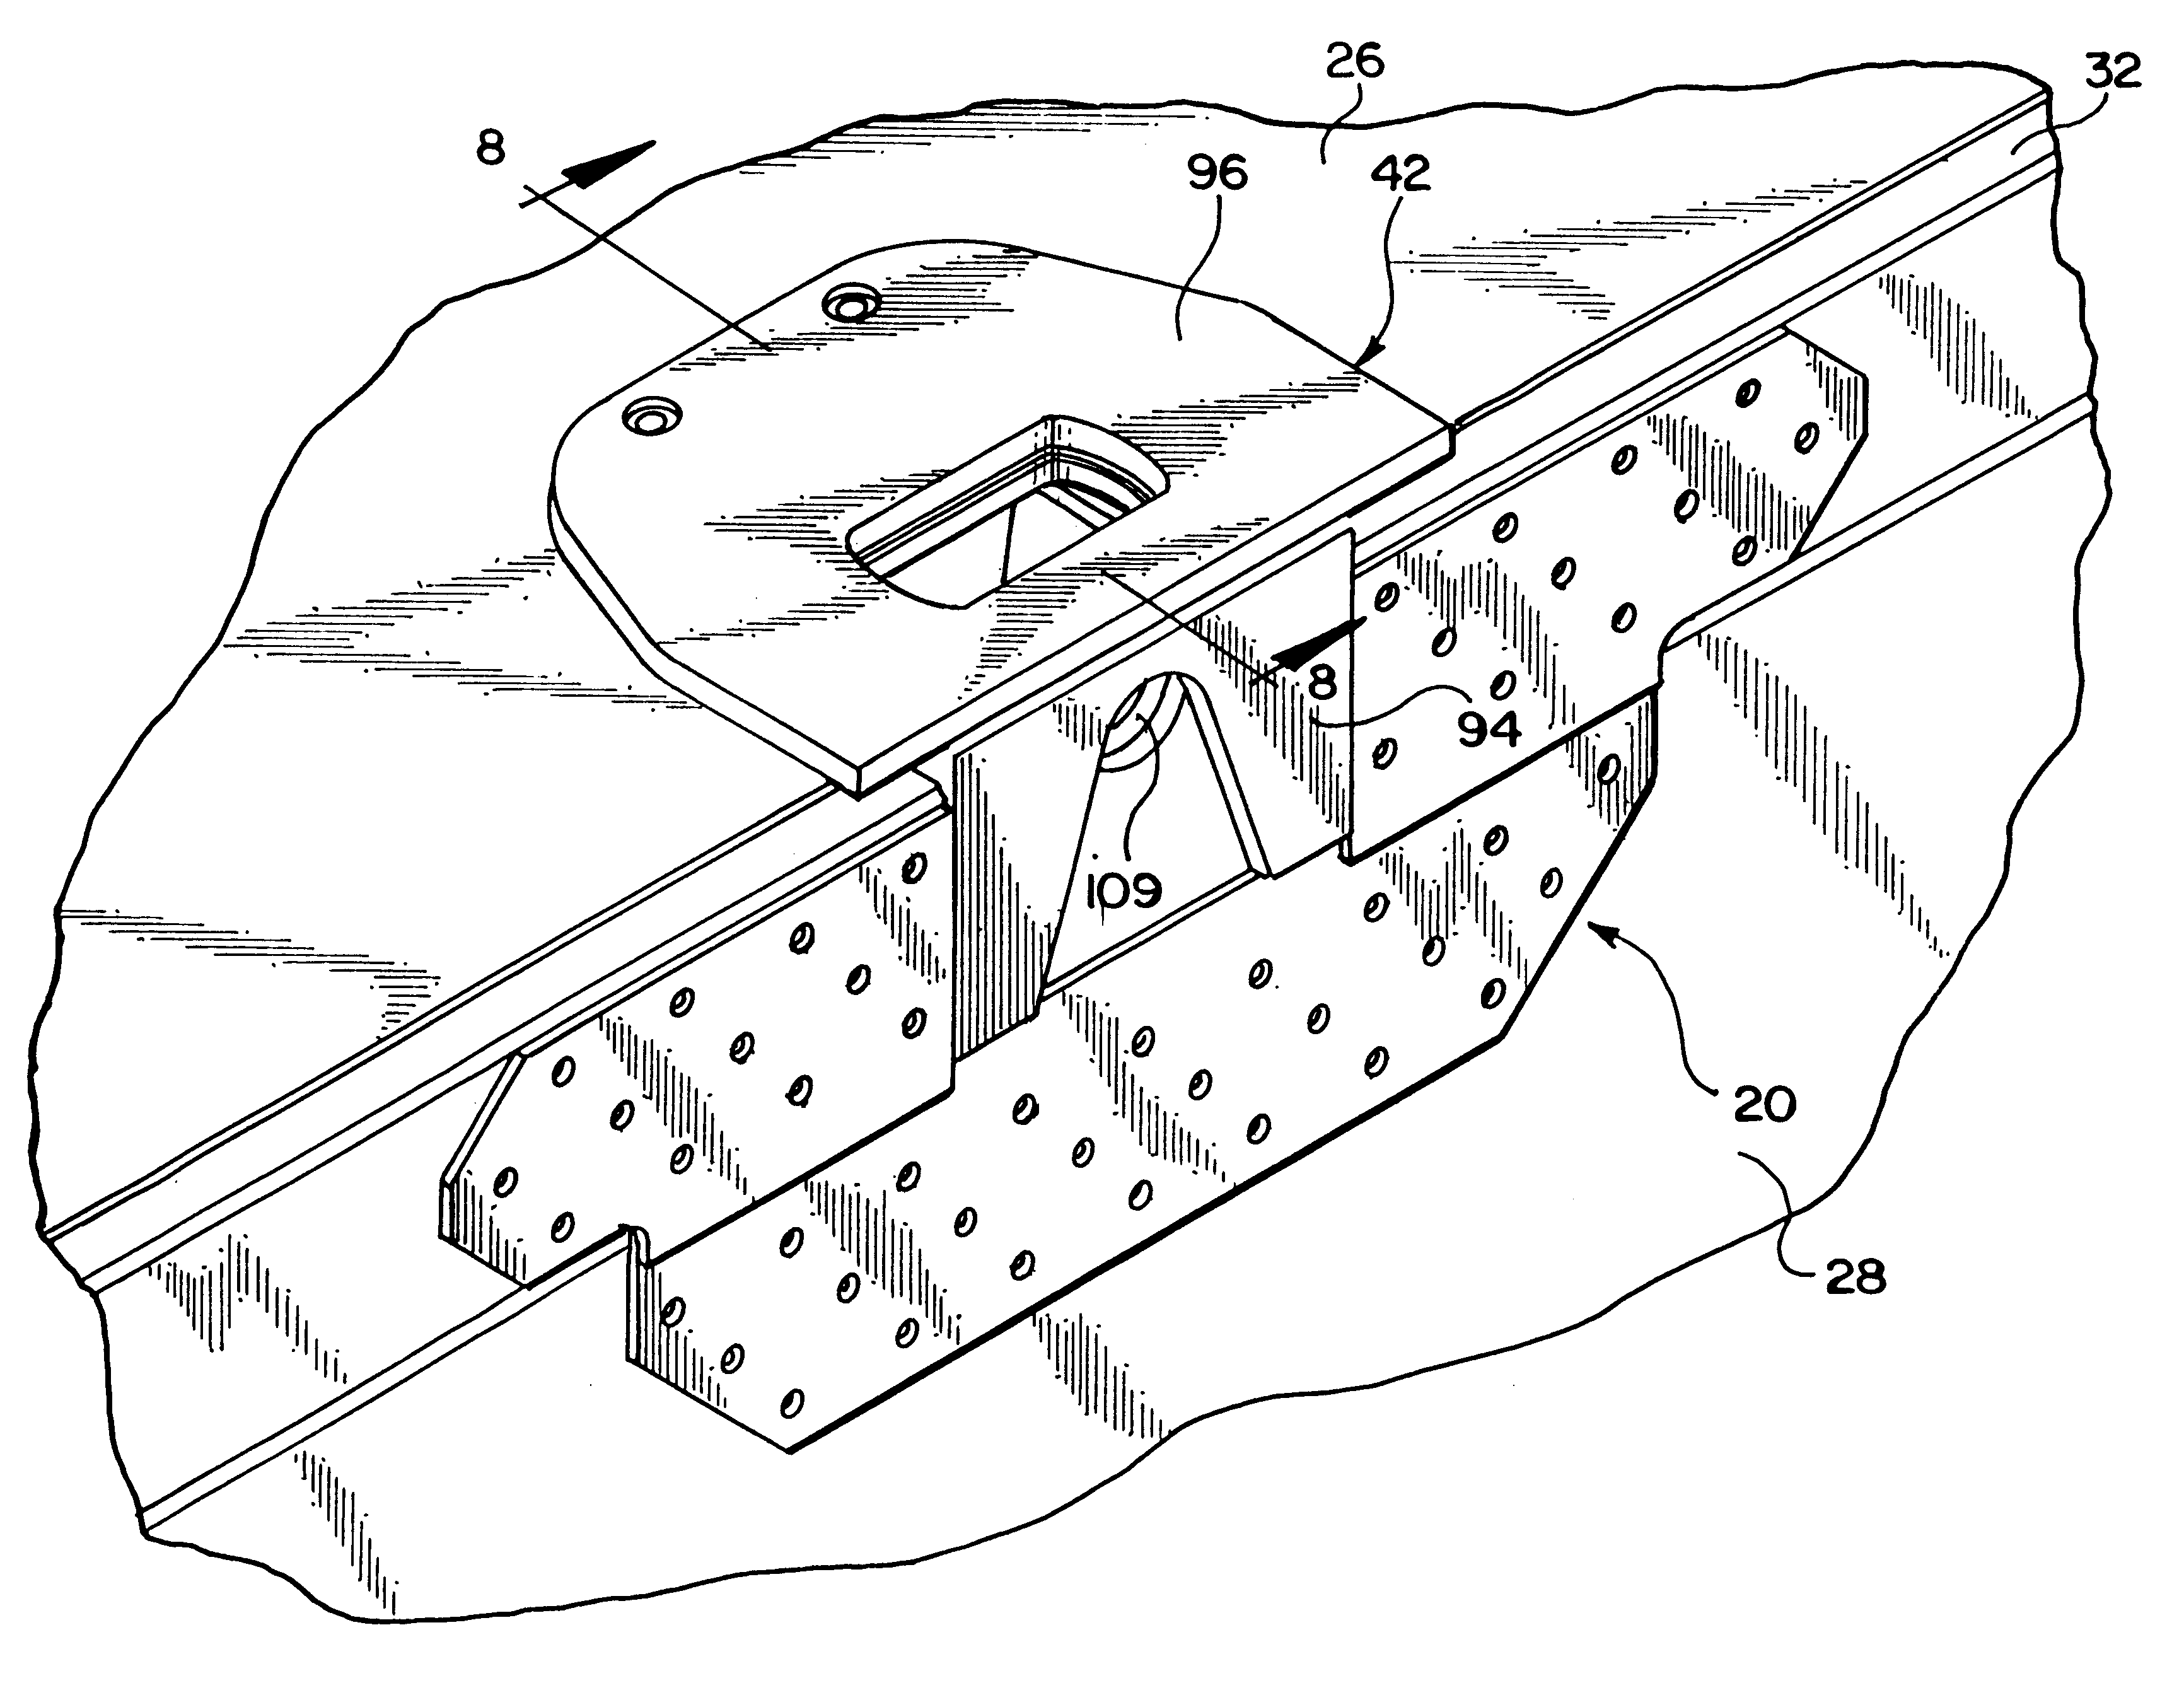 Multi-component lifting assembly for a container